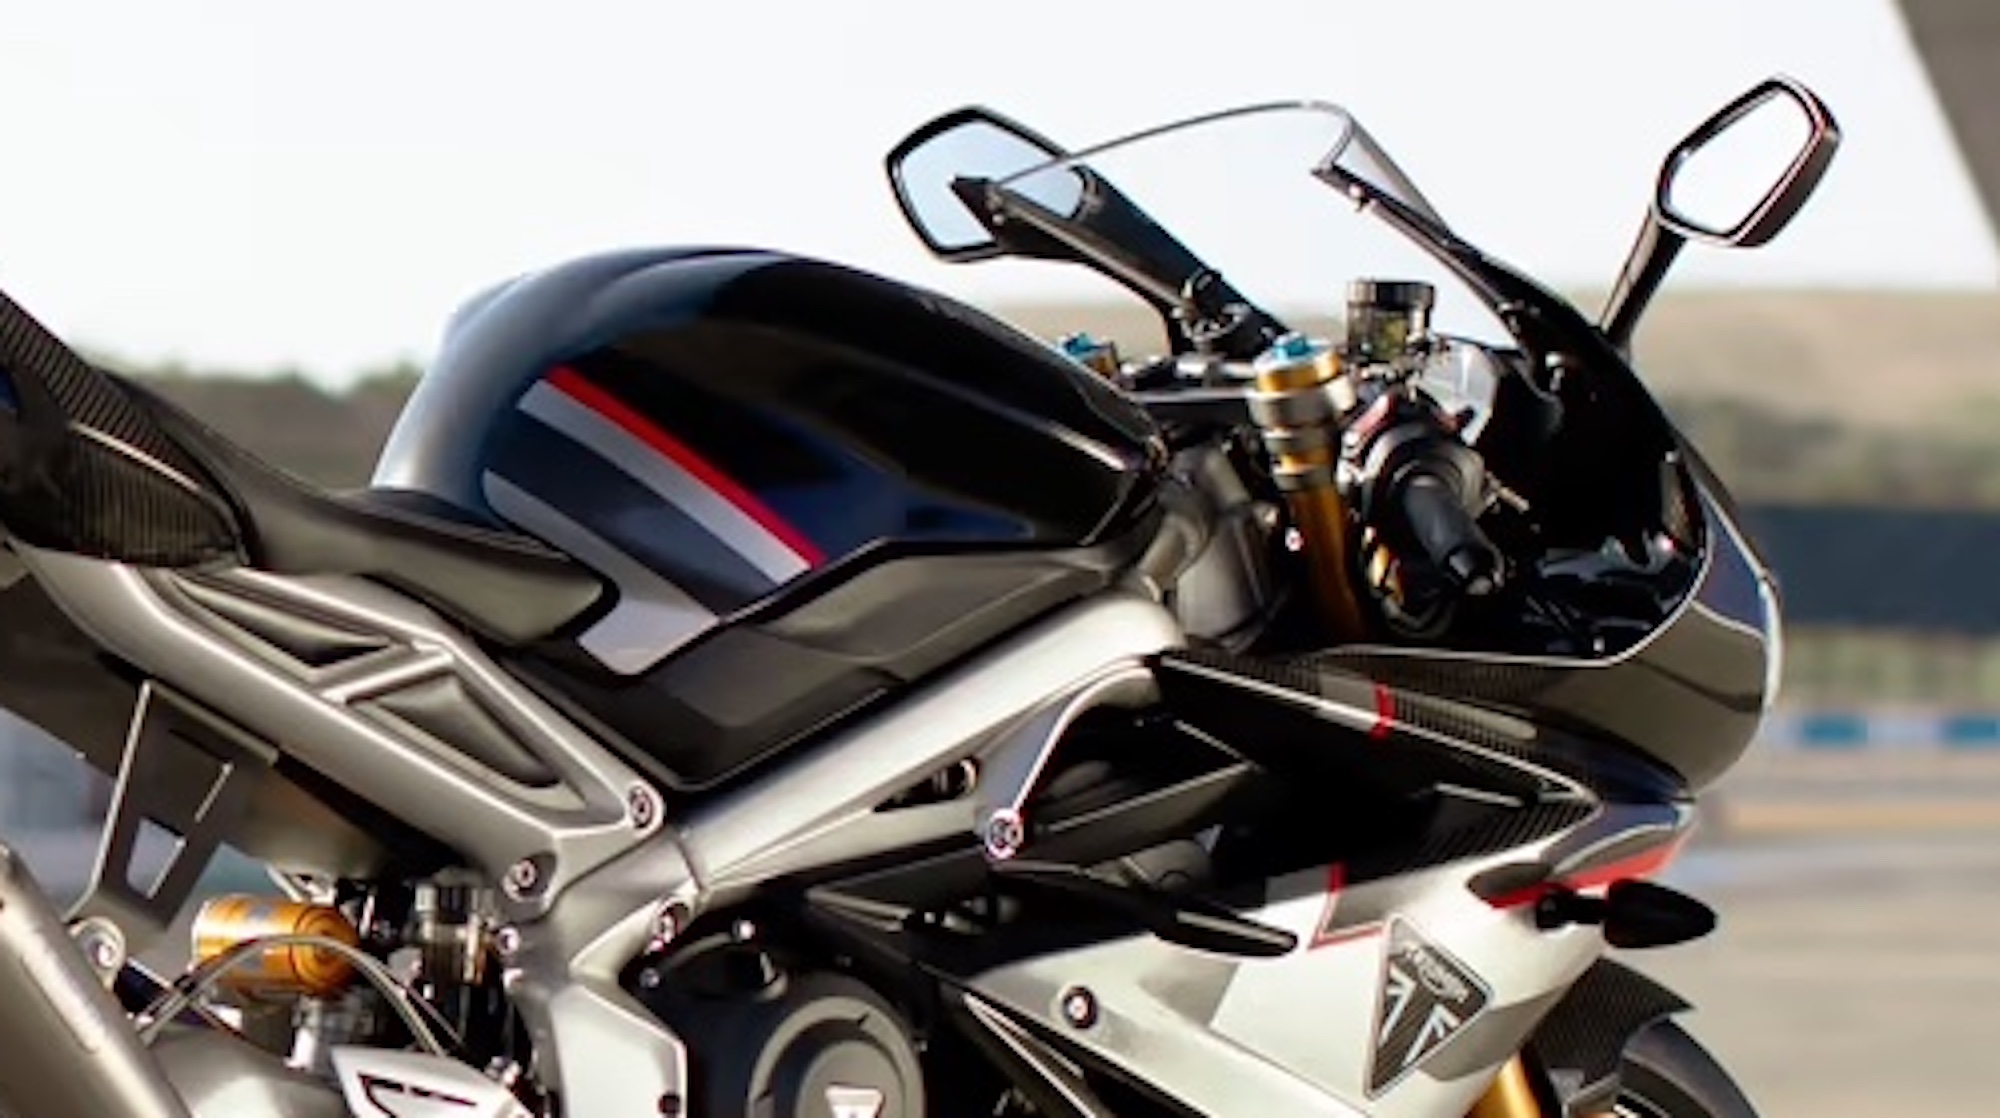 A view of the current Triumph Daytona 765, some components of which may be borrowed for this budding 660. Media sourced from Triumph.